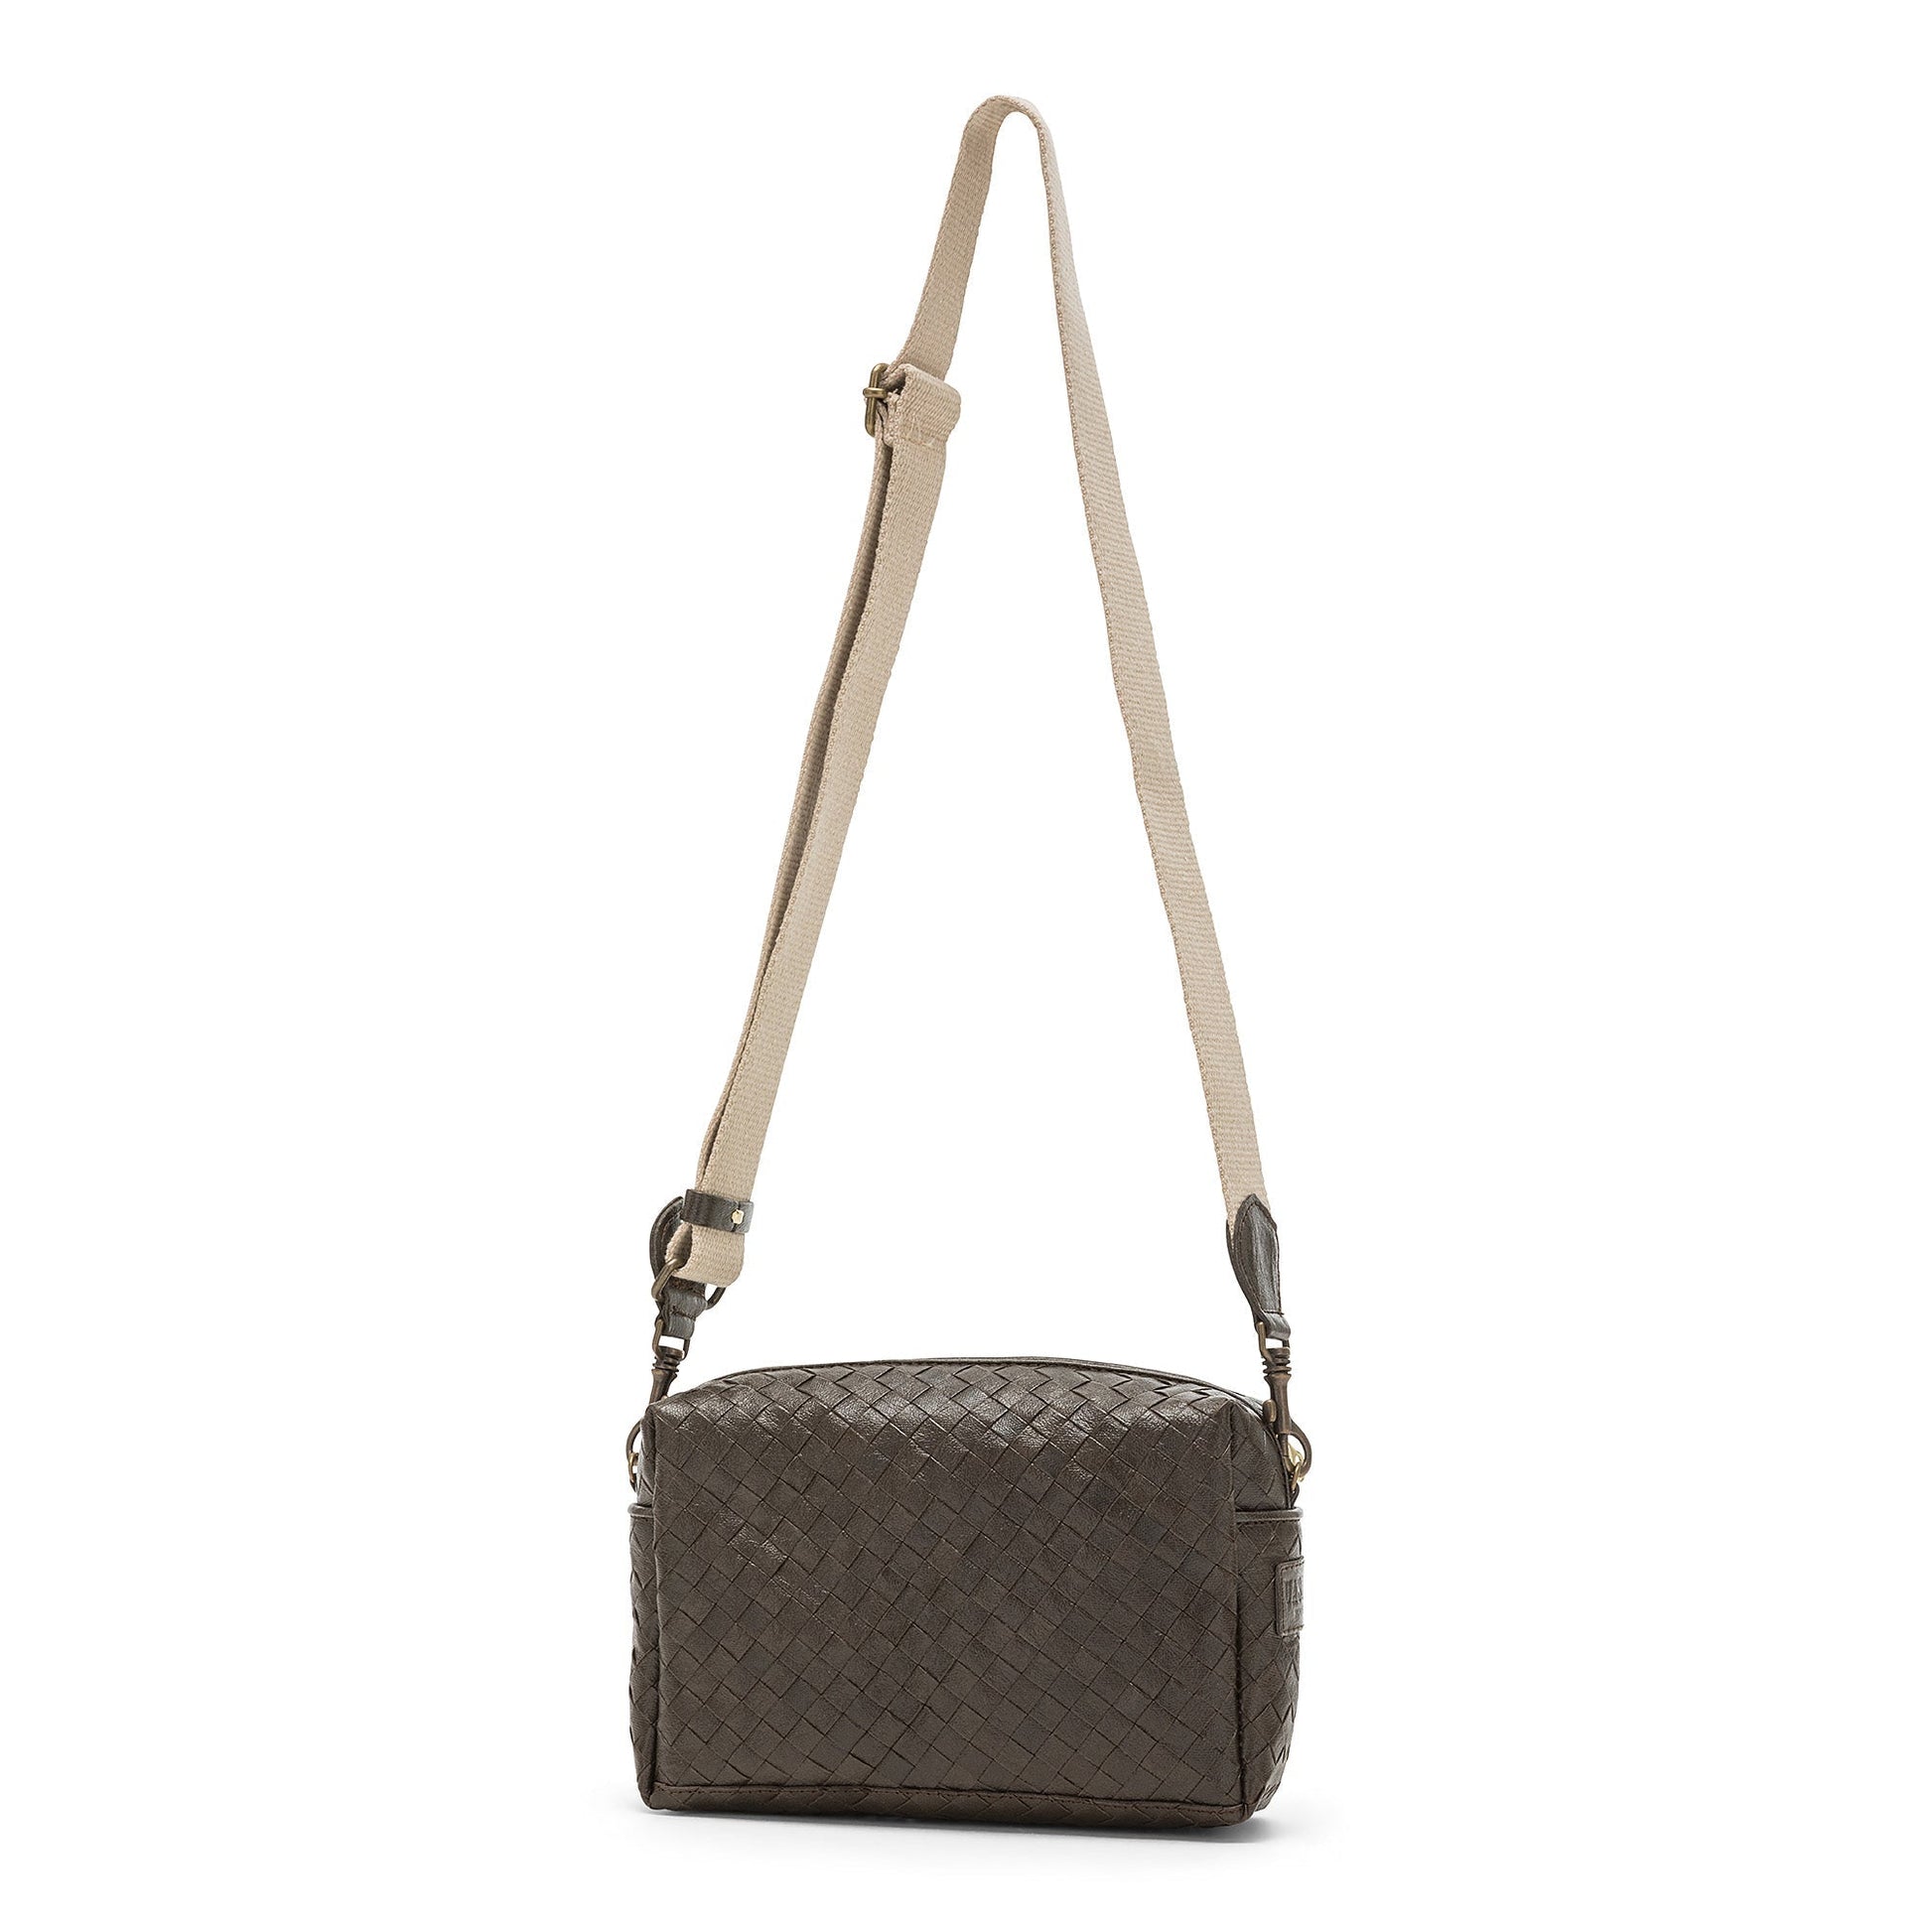 A small woven washable paper handbag is shown. The bag has a wide fabric shoulder strap. The bag is dark brown and the strap is a light wheat colour.